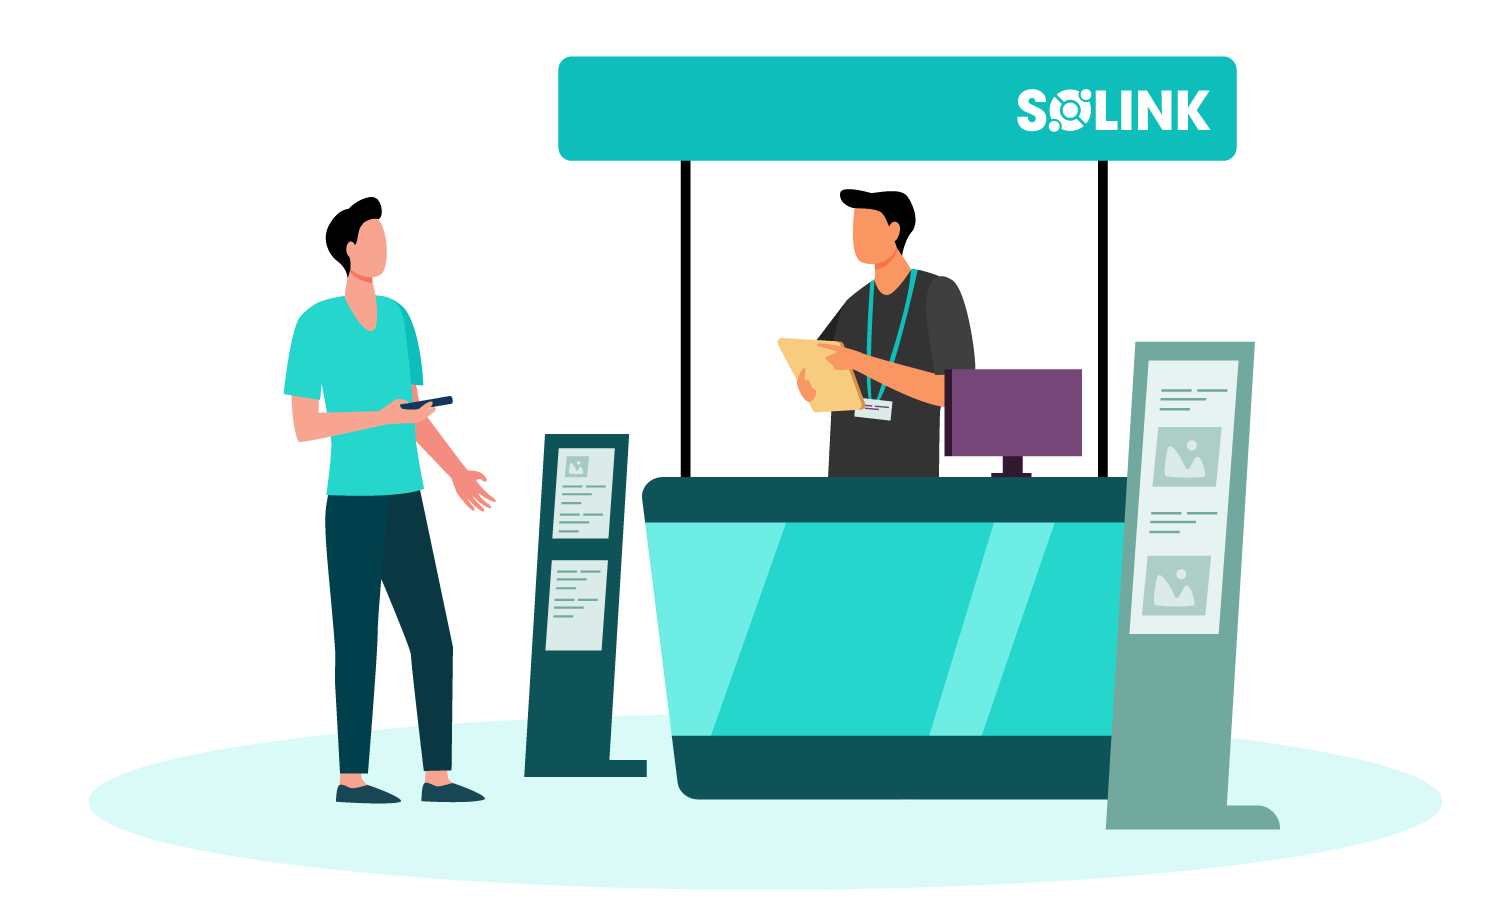 An illustration of a Solink booth